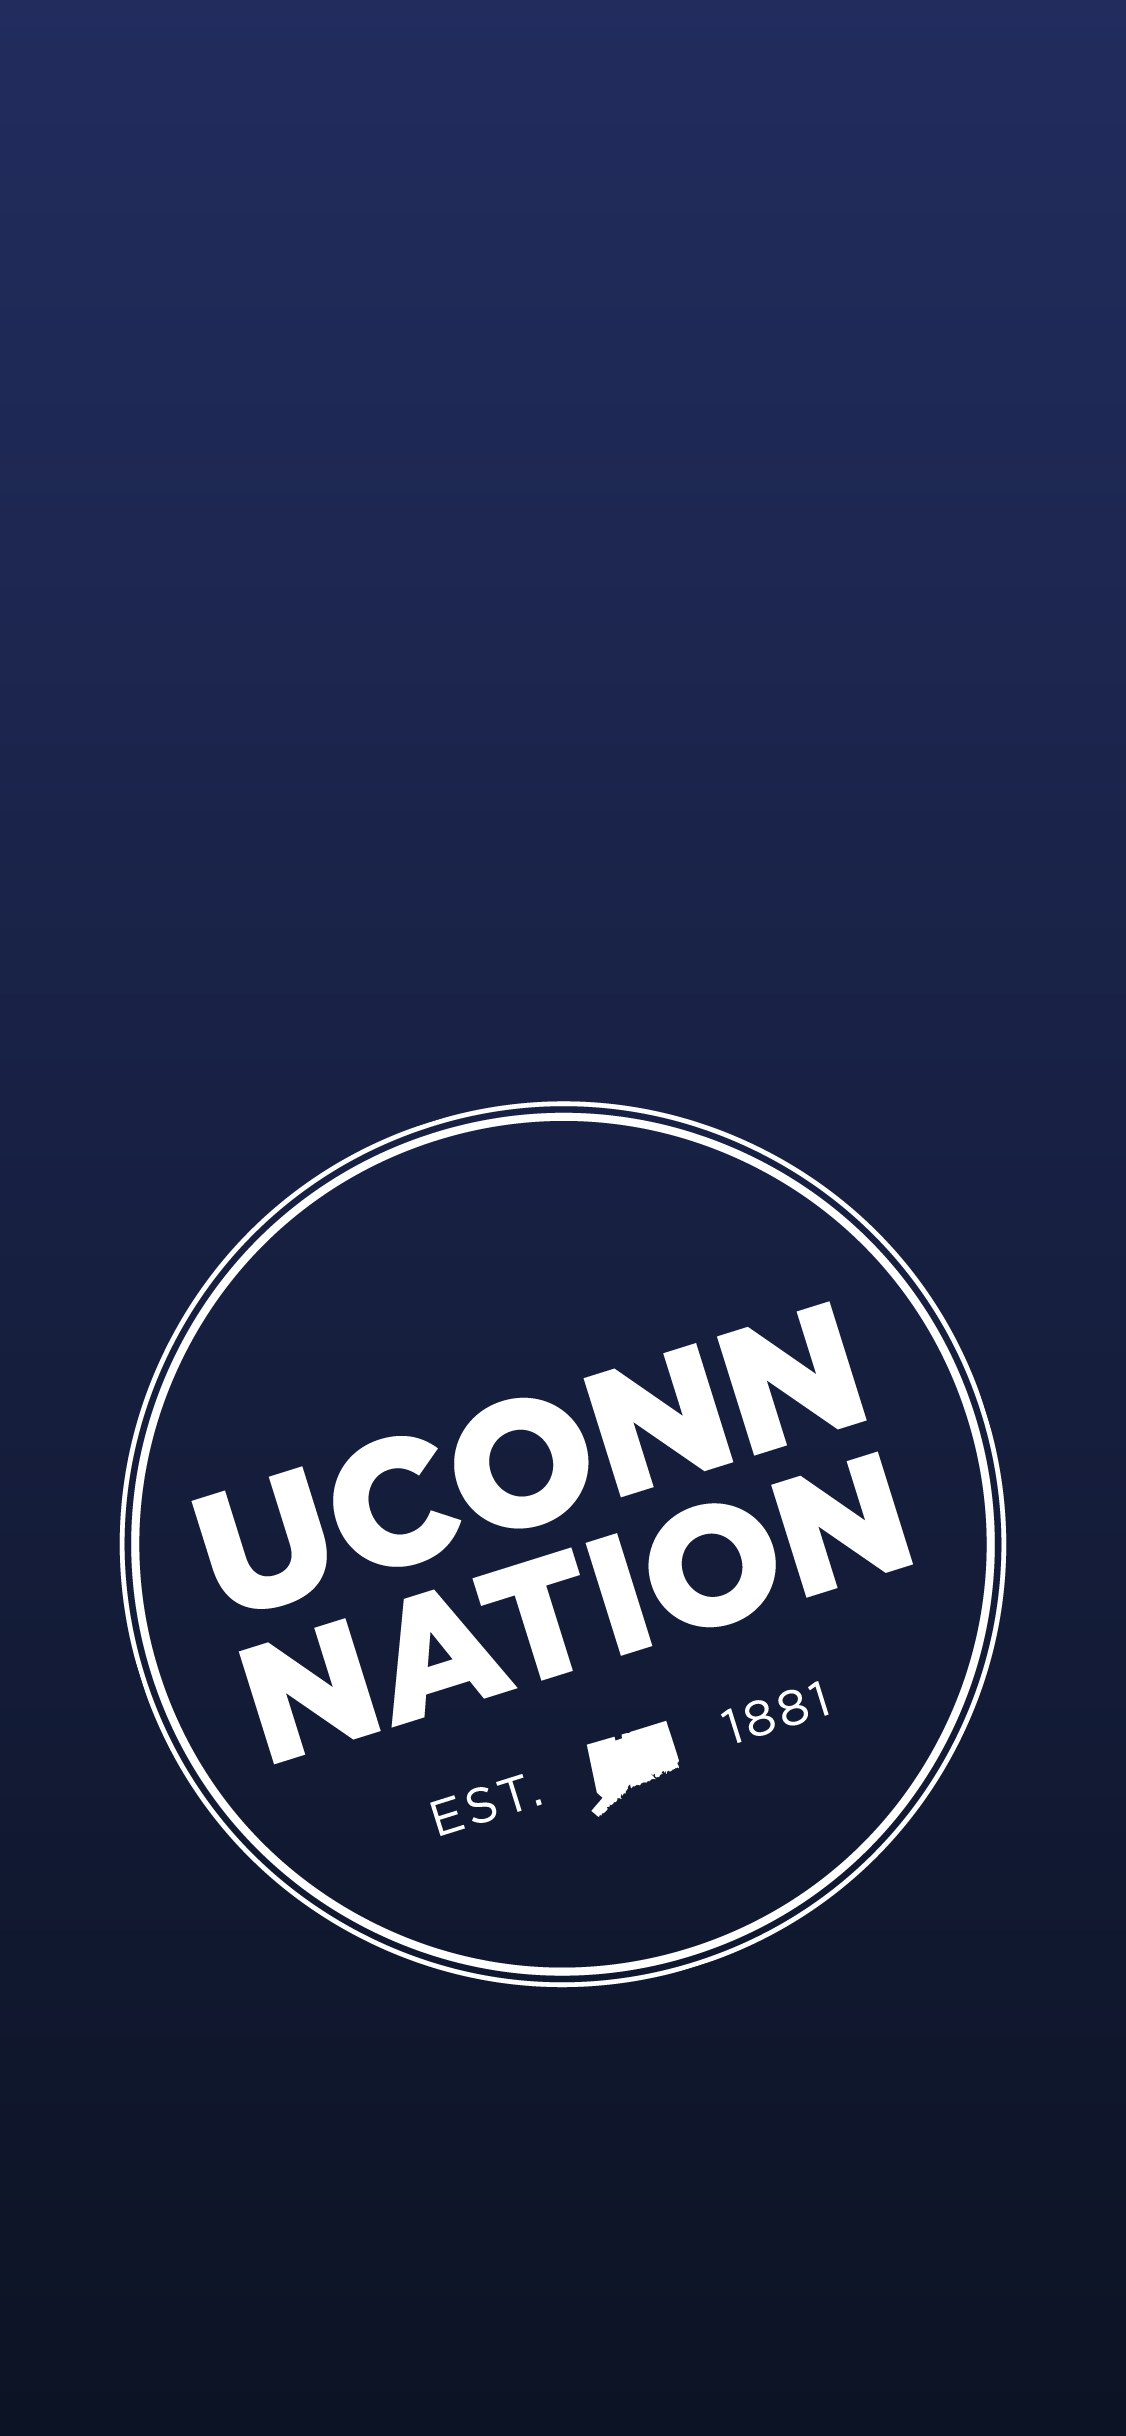 UConn on Twitter Winter is here and so are new UConn wallpaper options  Check em out and download your favorite httpstcotfATBKcKUv  httpstcosKt3ILV9rH  Twitter